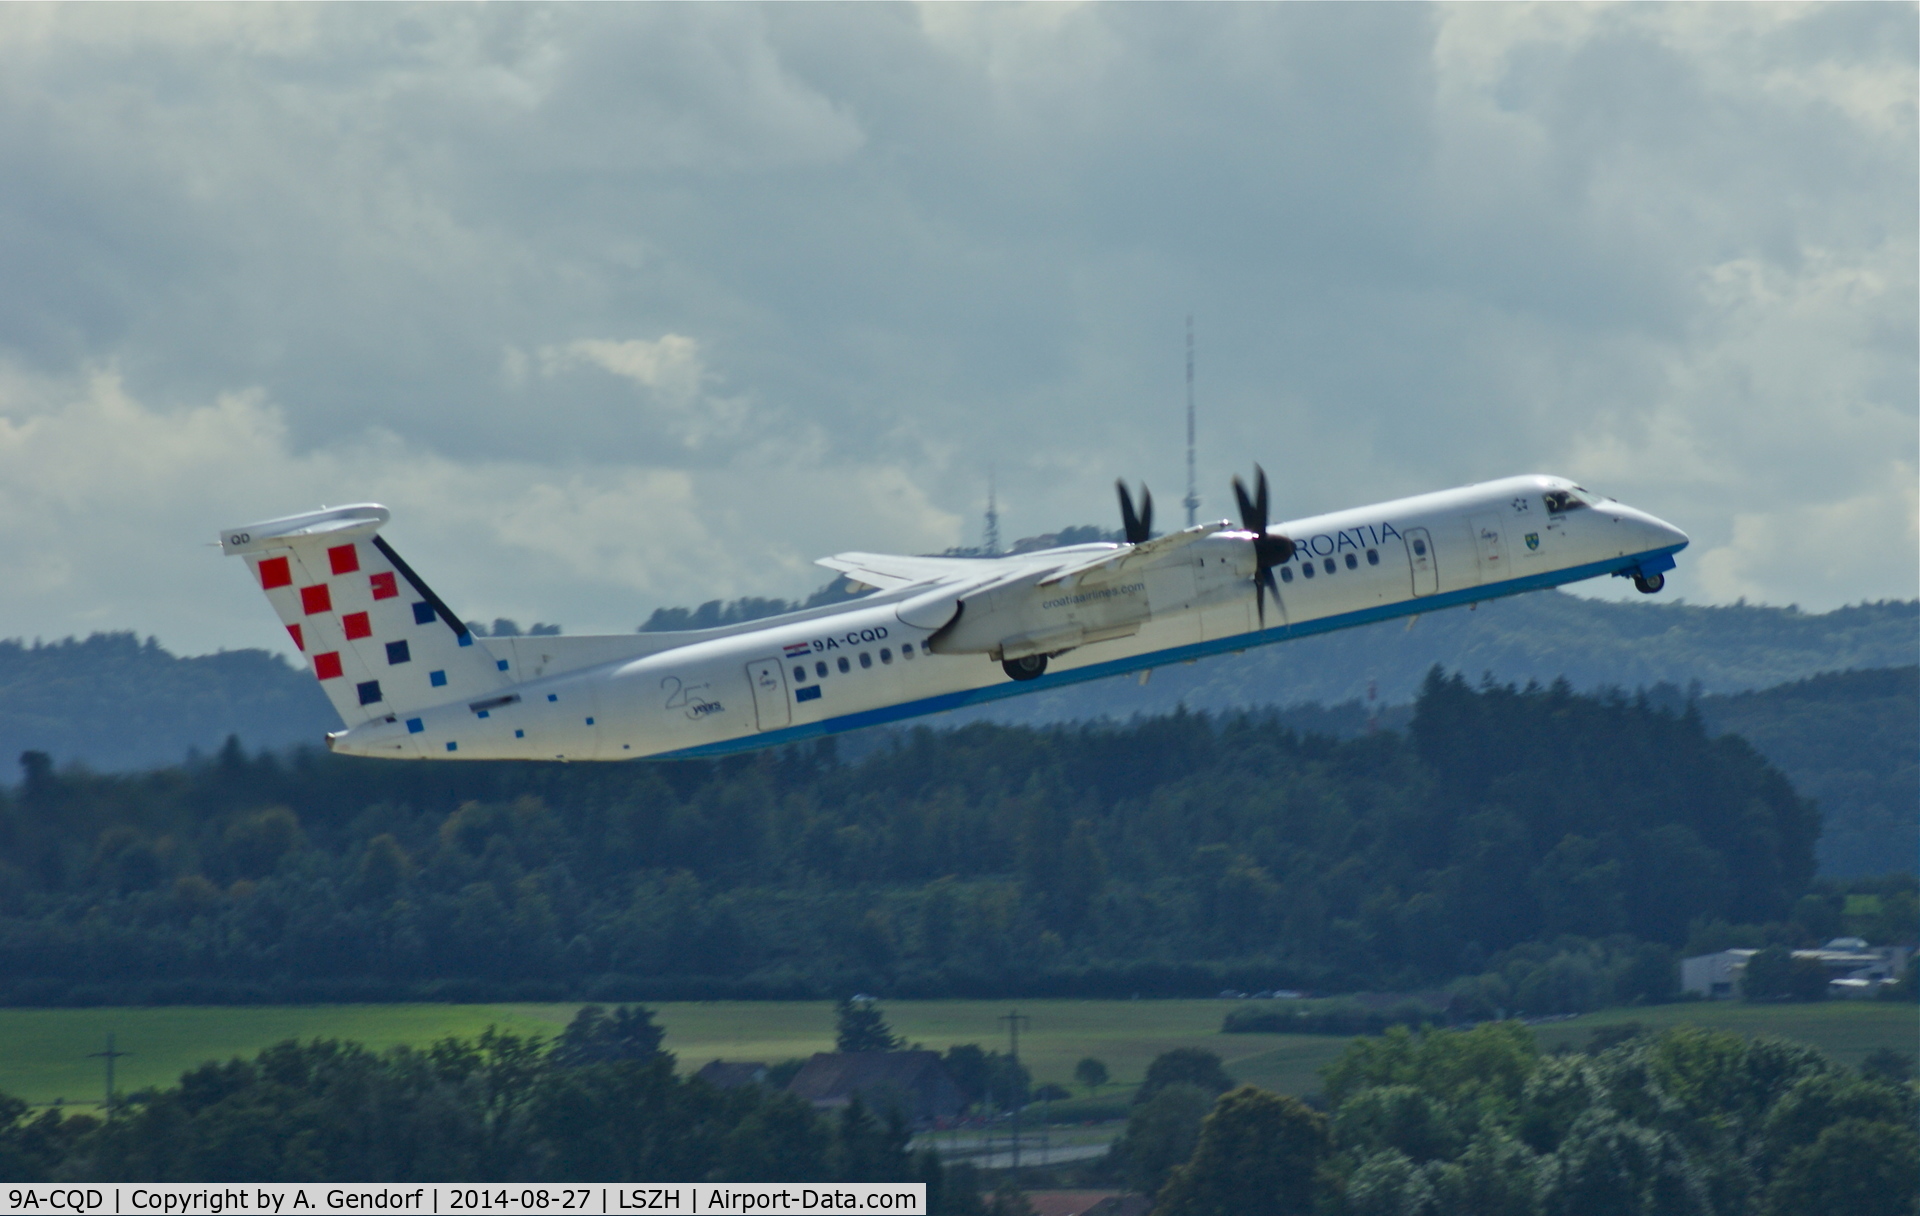 9A-CQD, 2009 De Havilland Canada DHC-8-402Q Dash 8 C/N 4260, Croatia Airlines, is here climbing out Zürich-Kloten(LSZH) in front of the well known landmark 